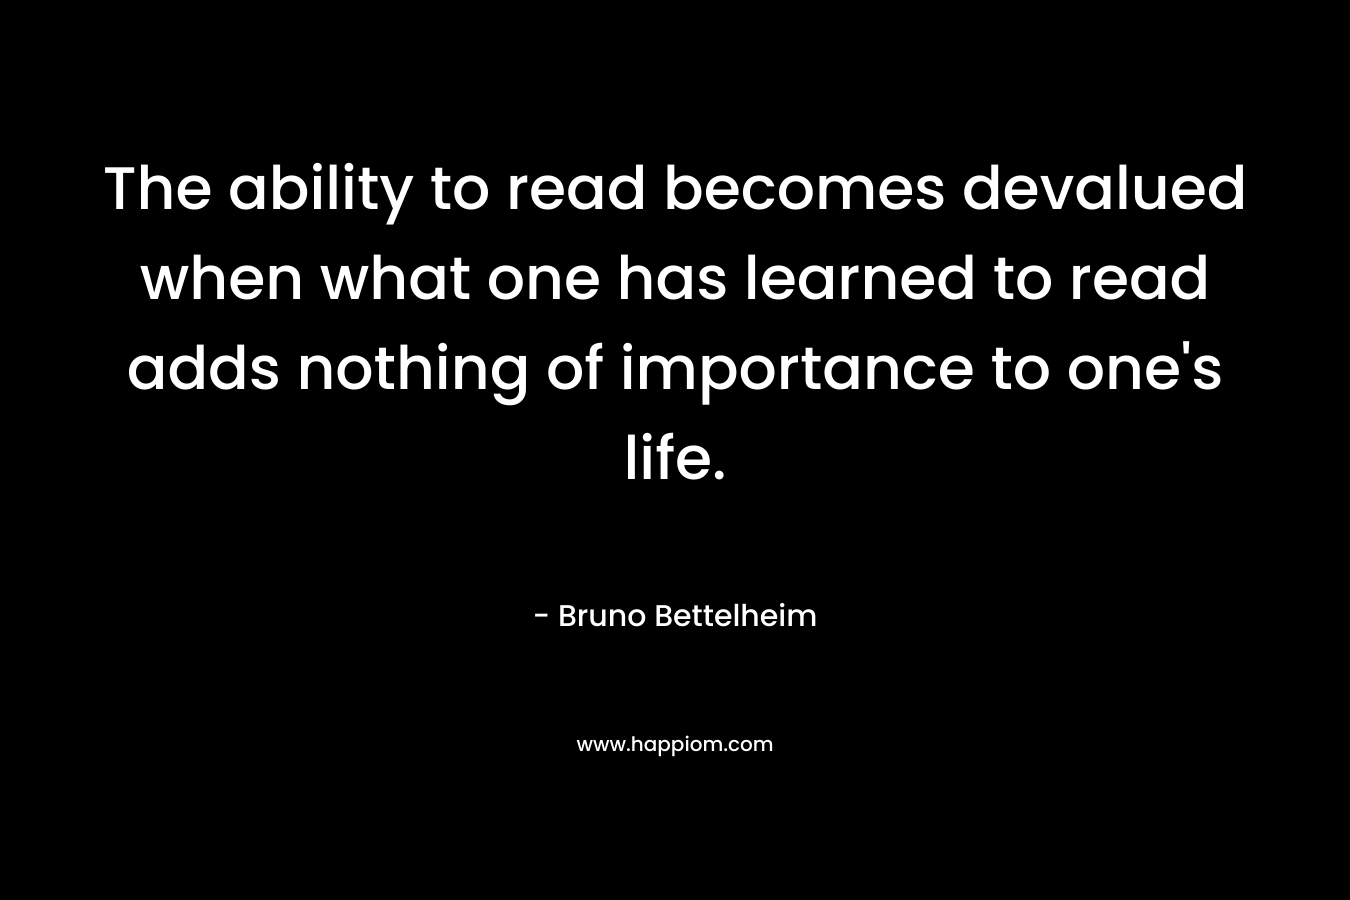 The ability to read becomes devalued when what one has learned to read adds nothing of importance to one’s life. – Bruno Bettelheim